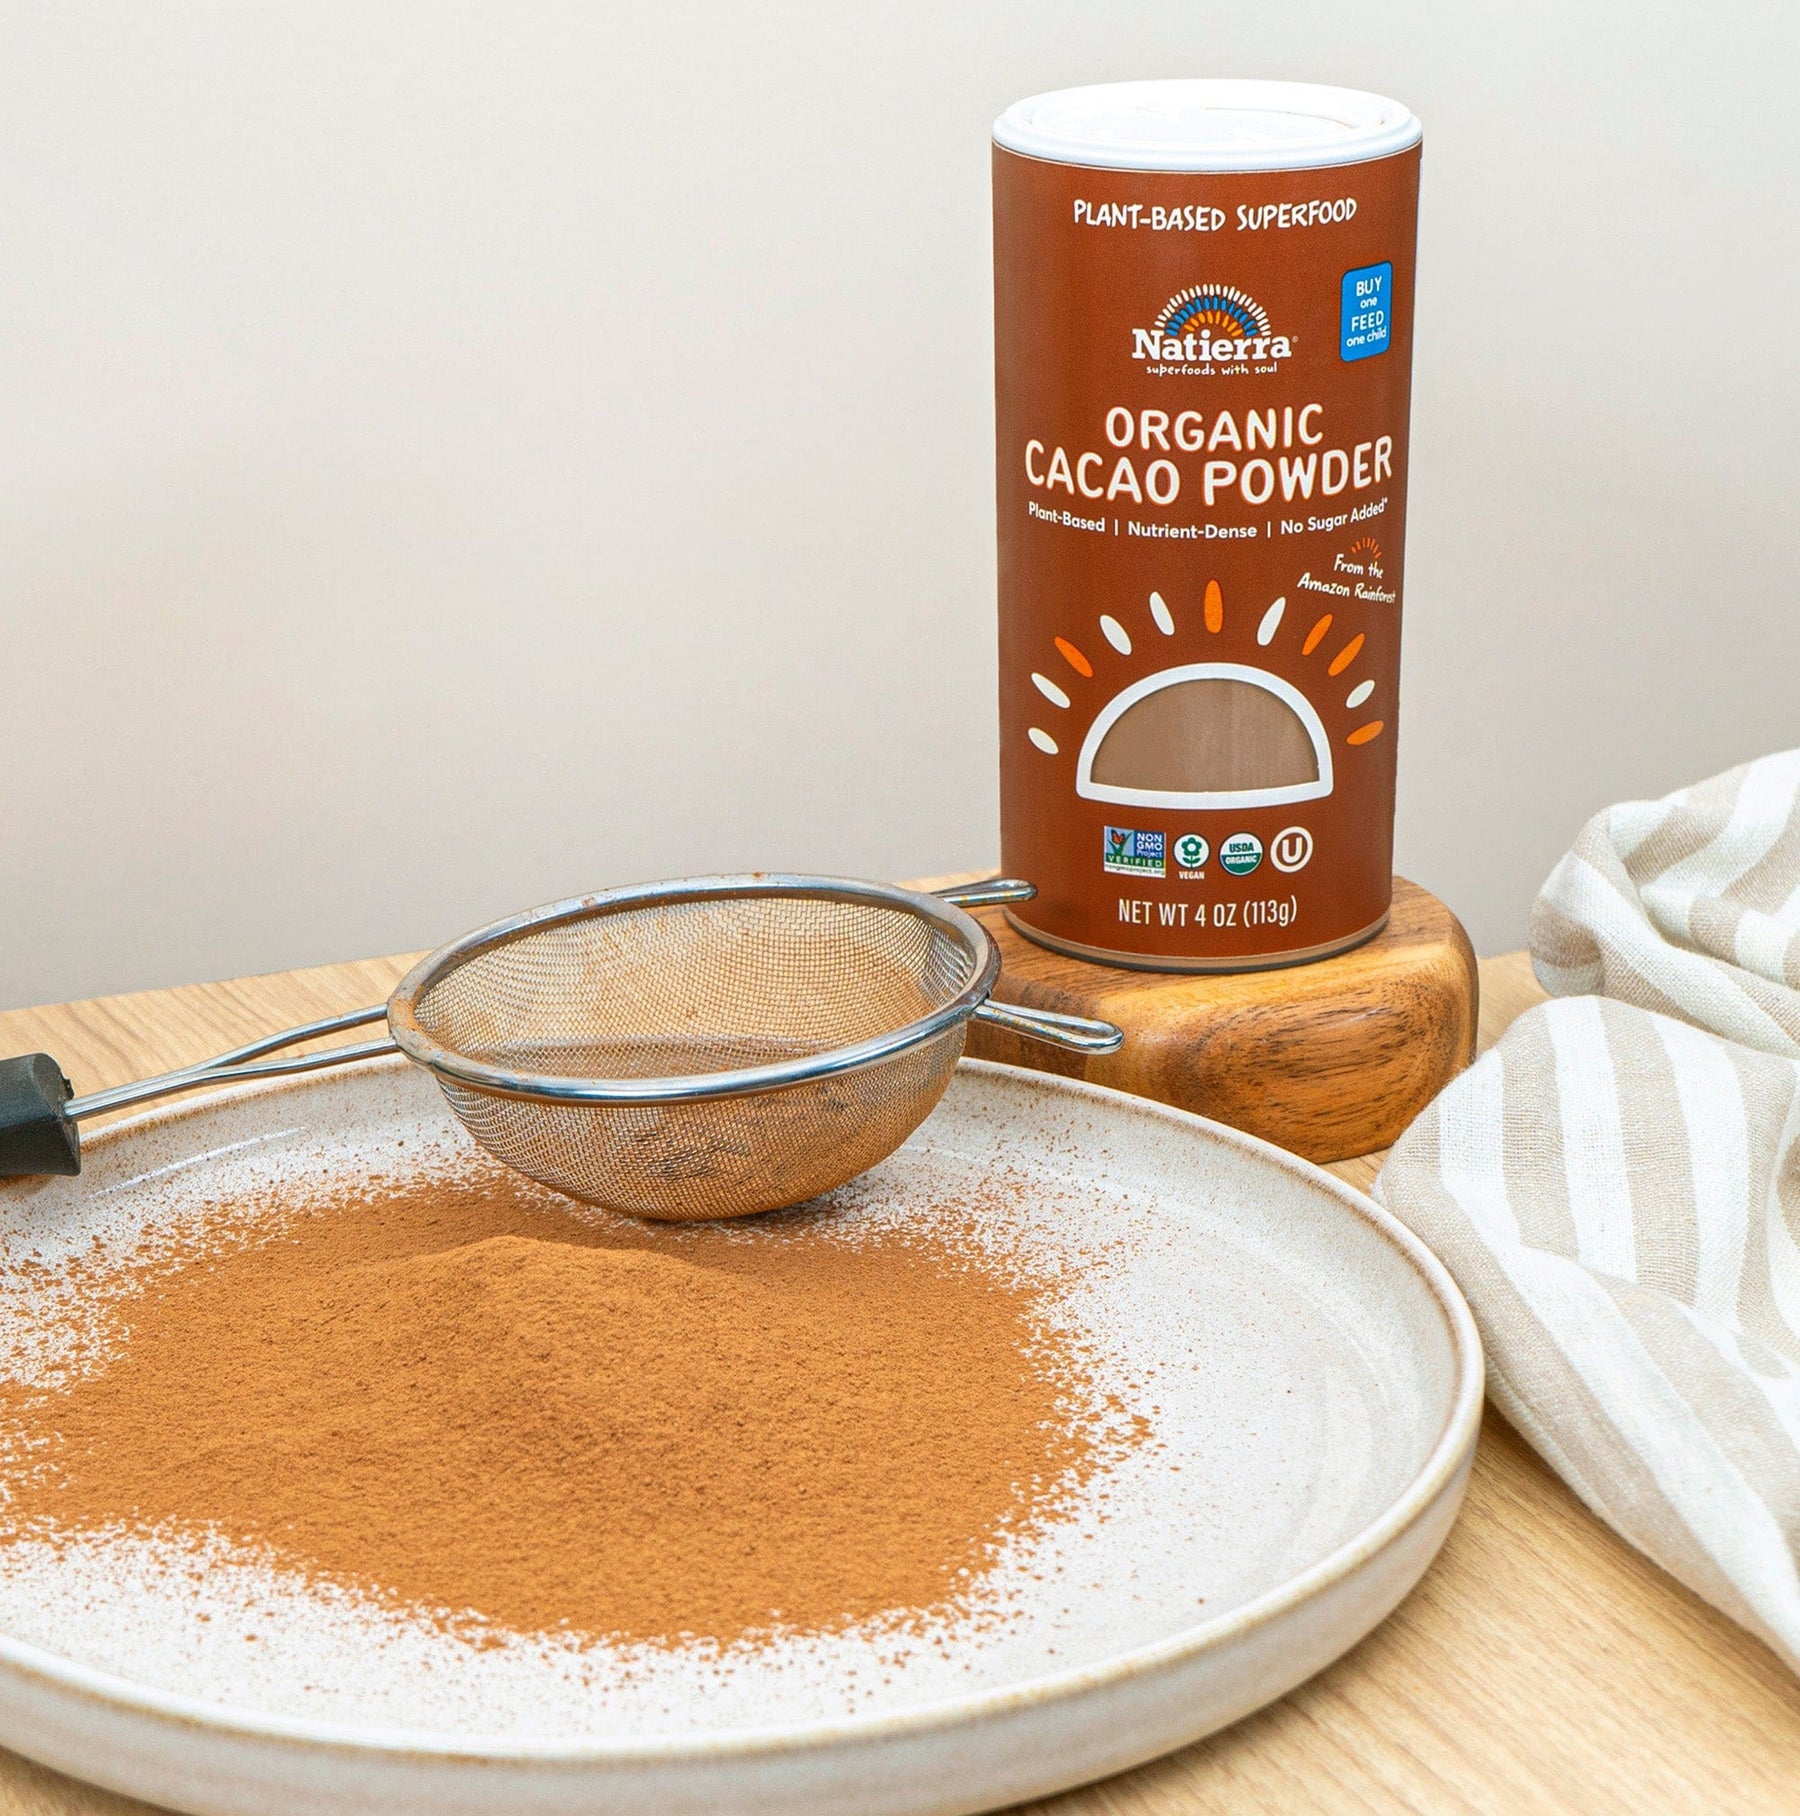 Natierra Organic Cacao Powder with powder on a plate with a small drainer.